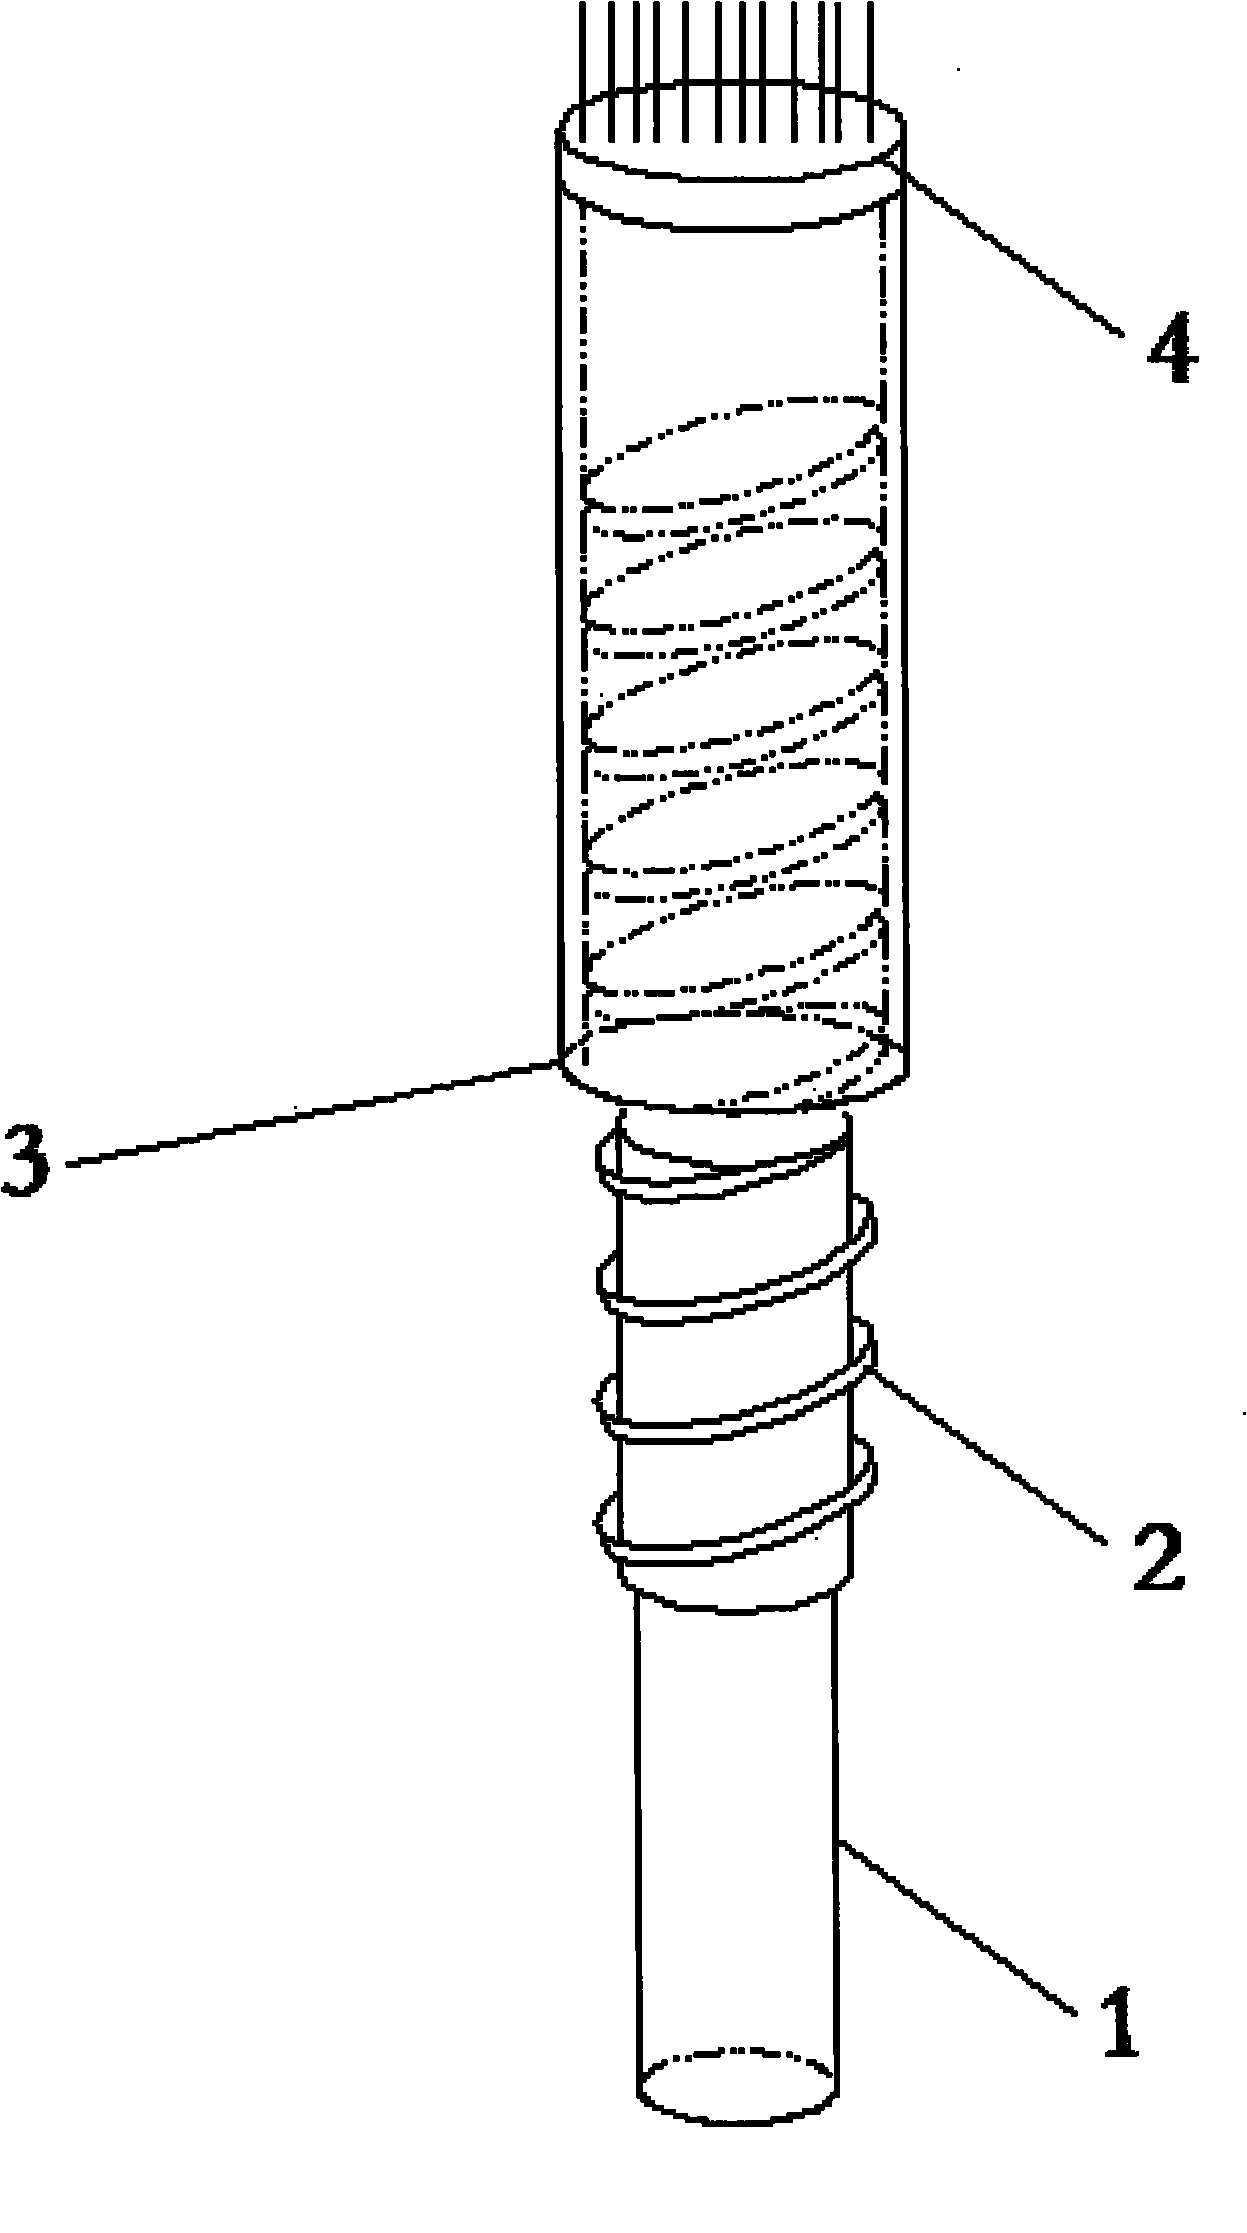 Manufacture method for chalk with telescopic holding handle